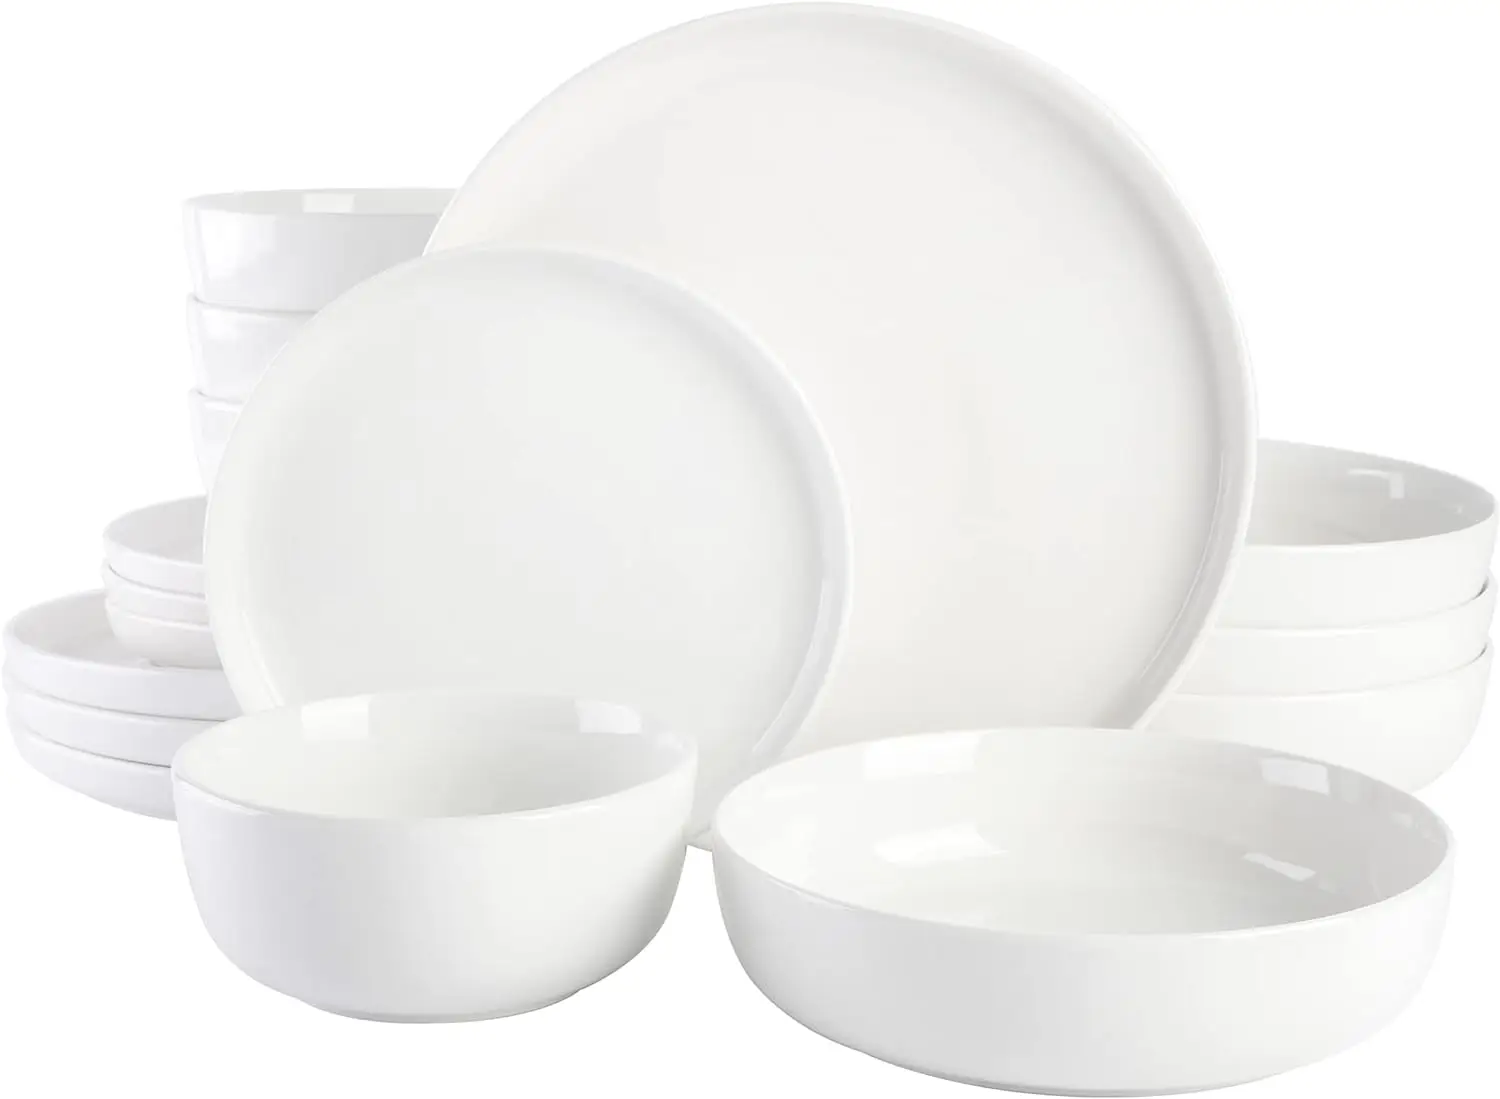 

Gibson Home Oslo Porcelain Chip and Scratch Resistant Dinnerware Set, Service for 4 (16pcs), White